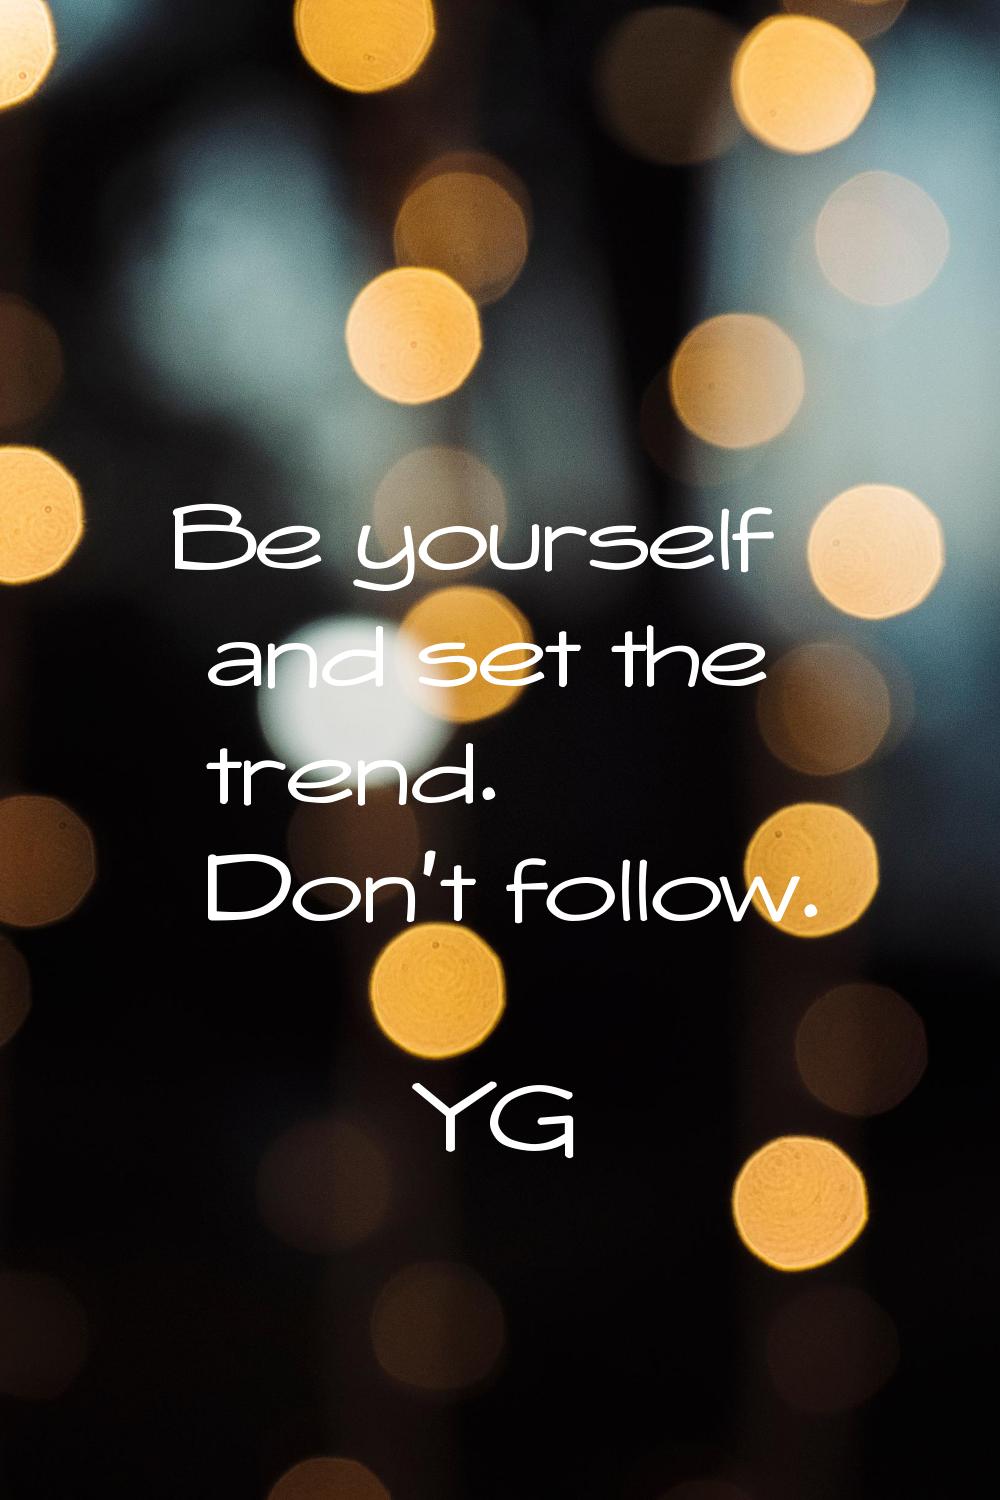 Be yourself and set the trend. Don't follow.